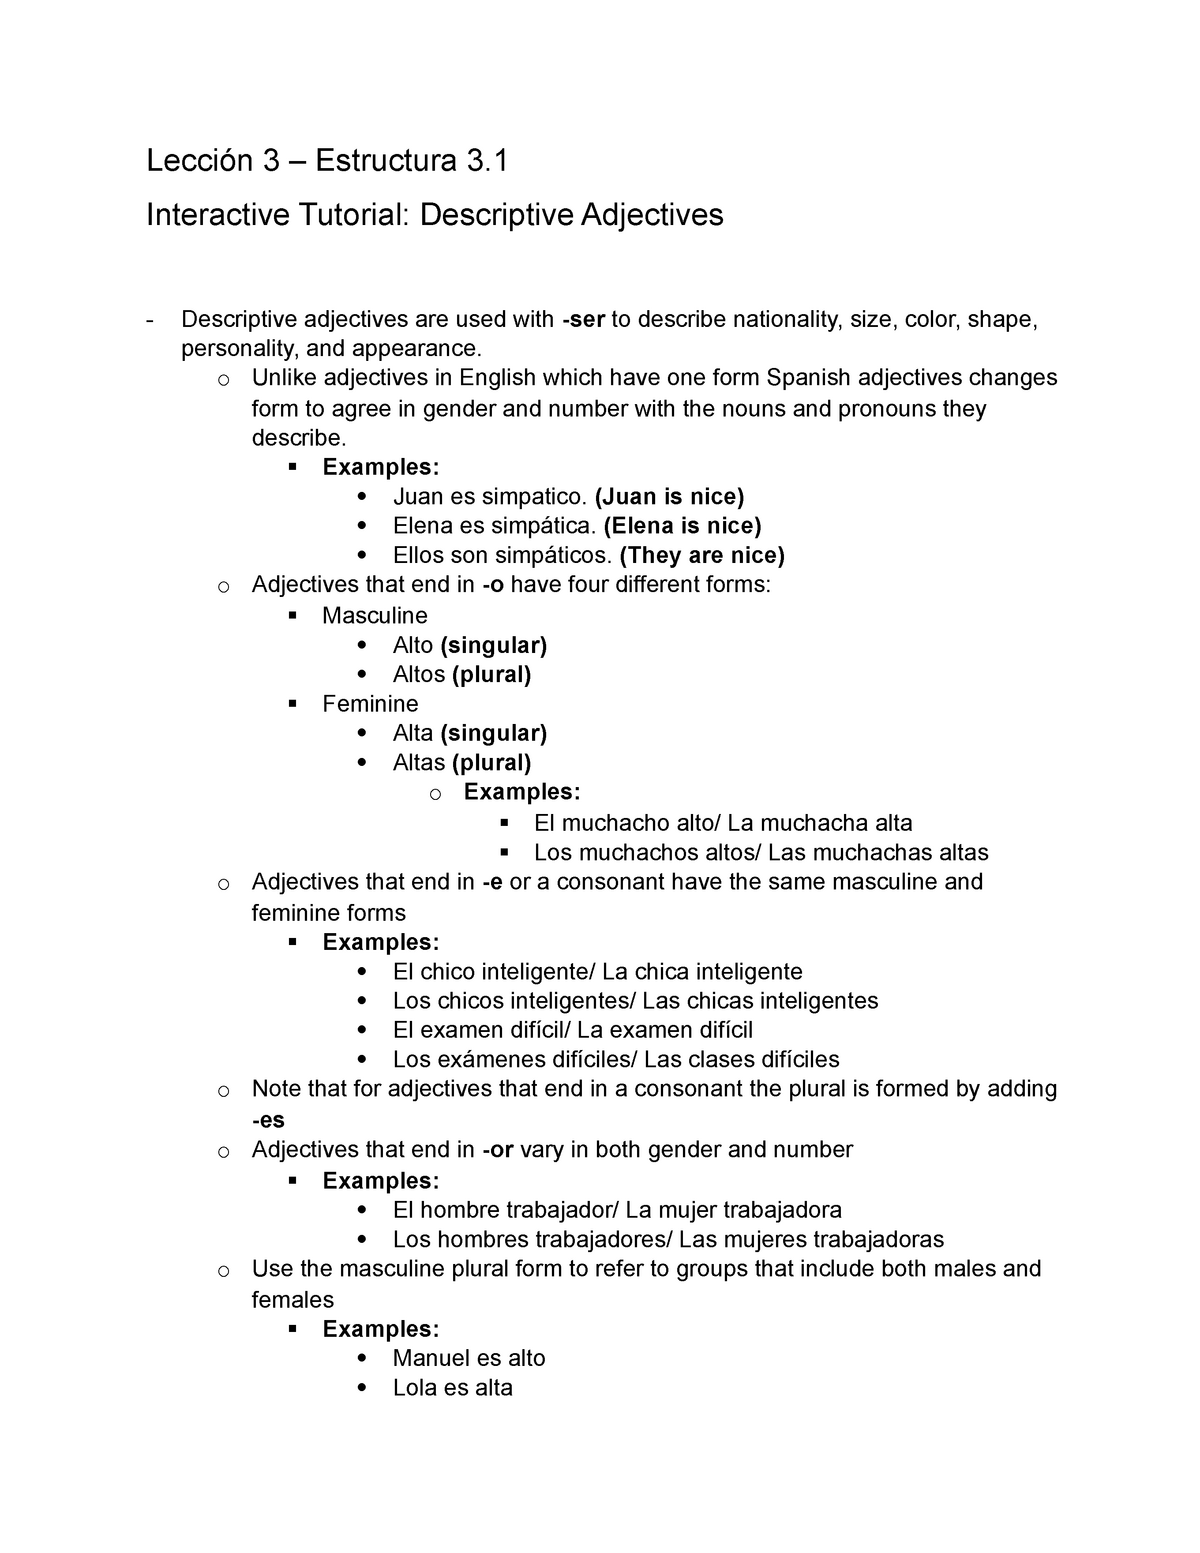 Lecci n 3 Estructura 3 1 Tutorial Notes On Descriptive Adjectives In Spanish Lecci n 3